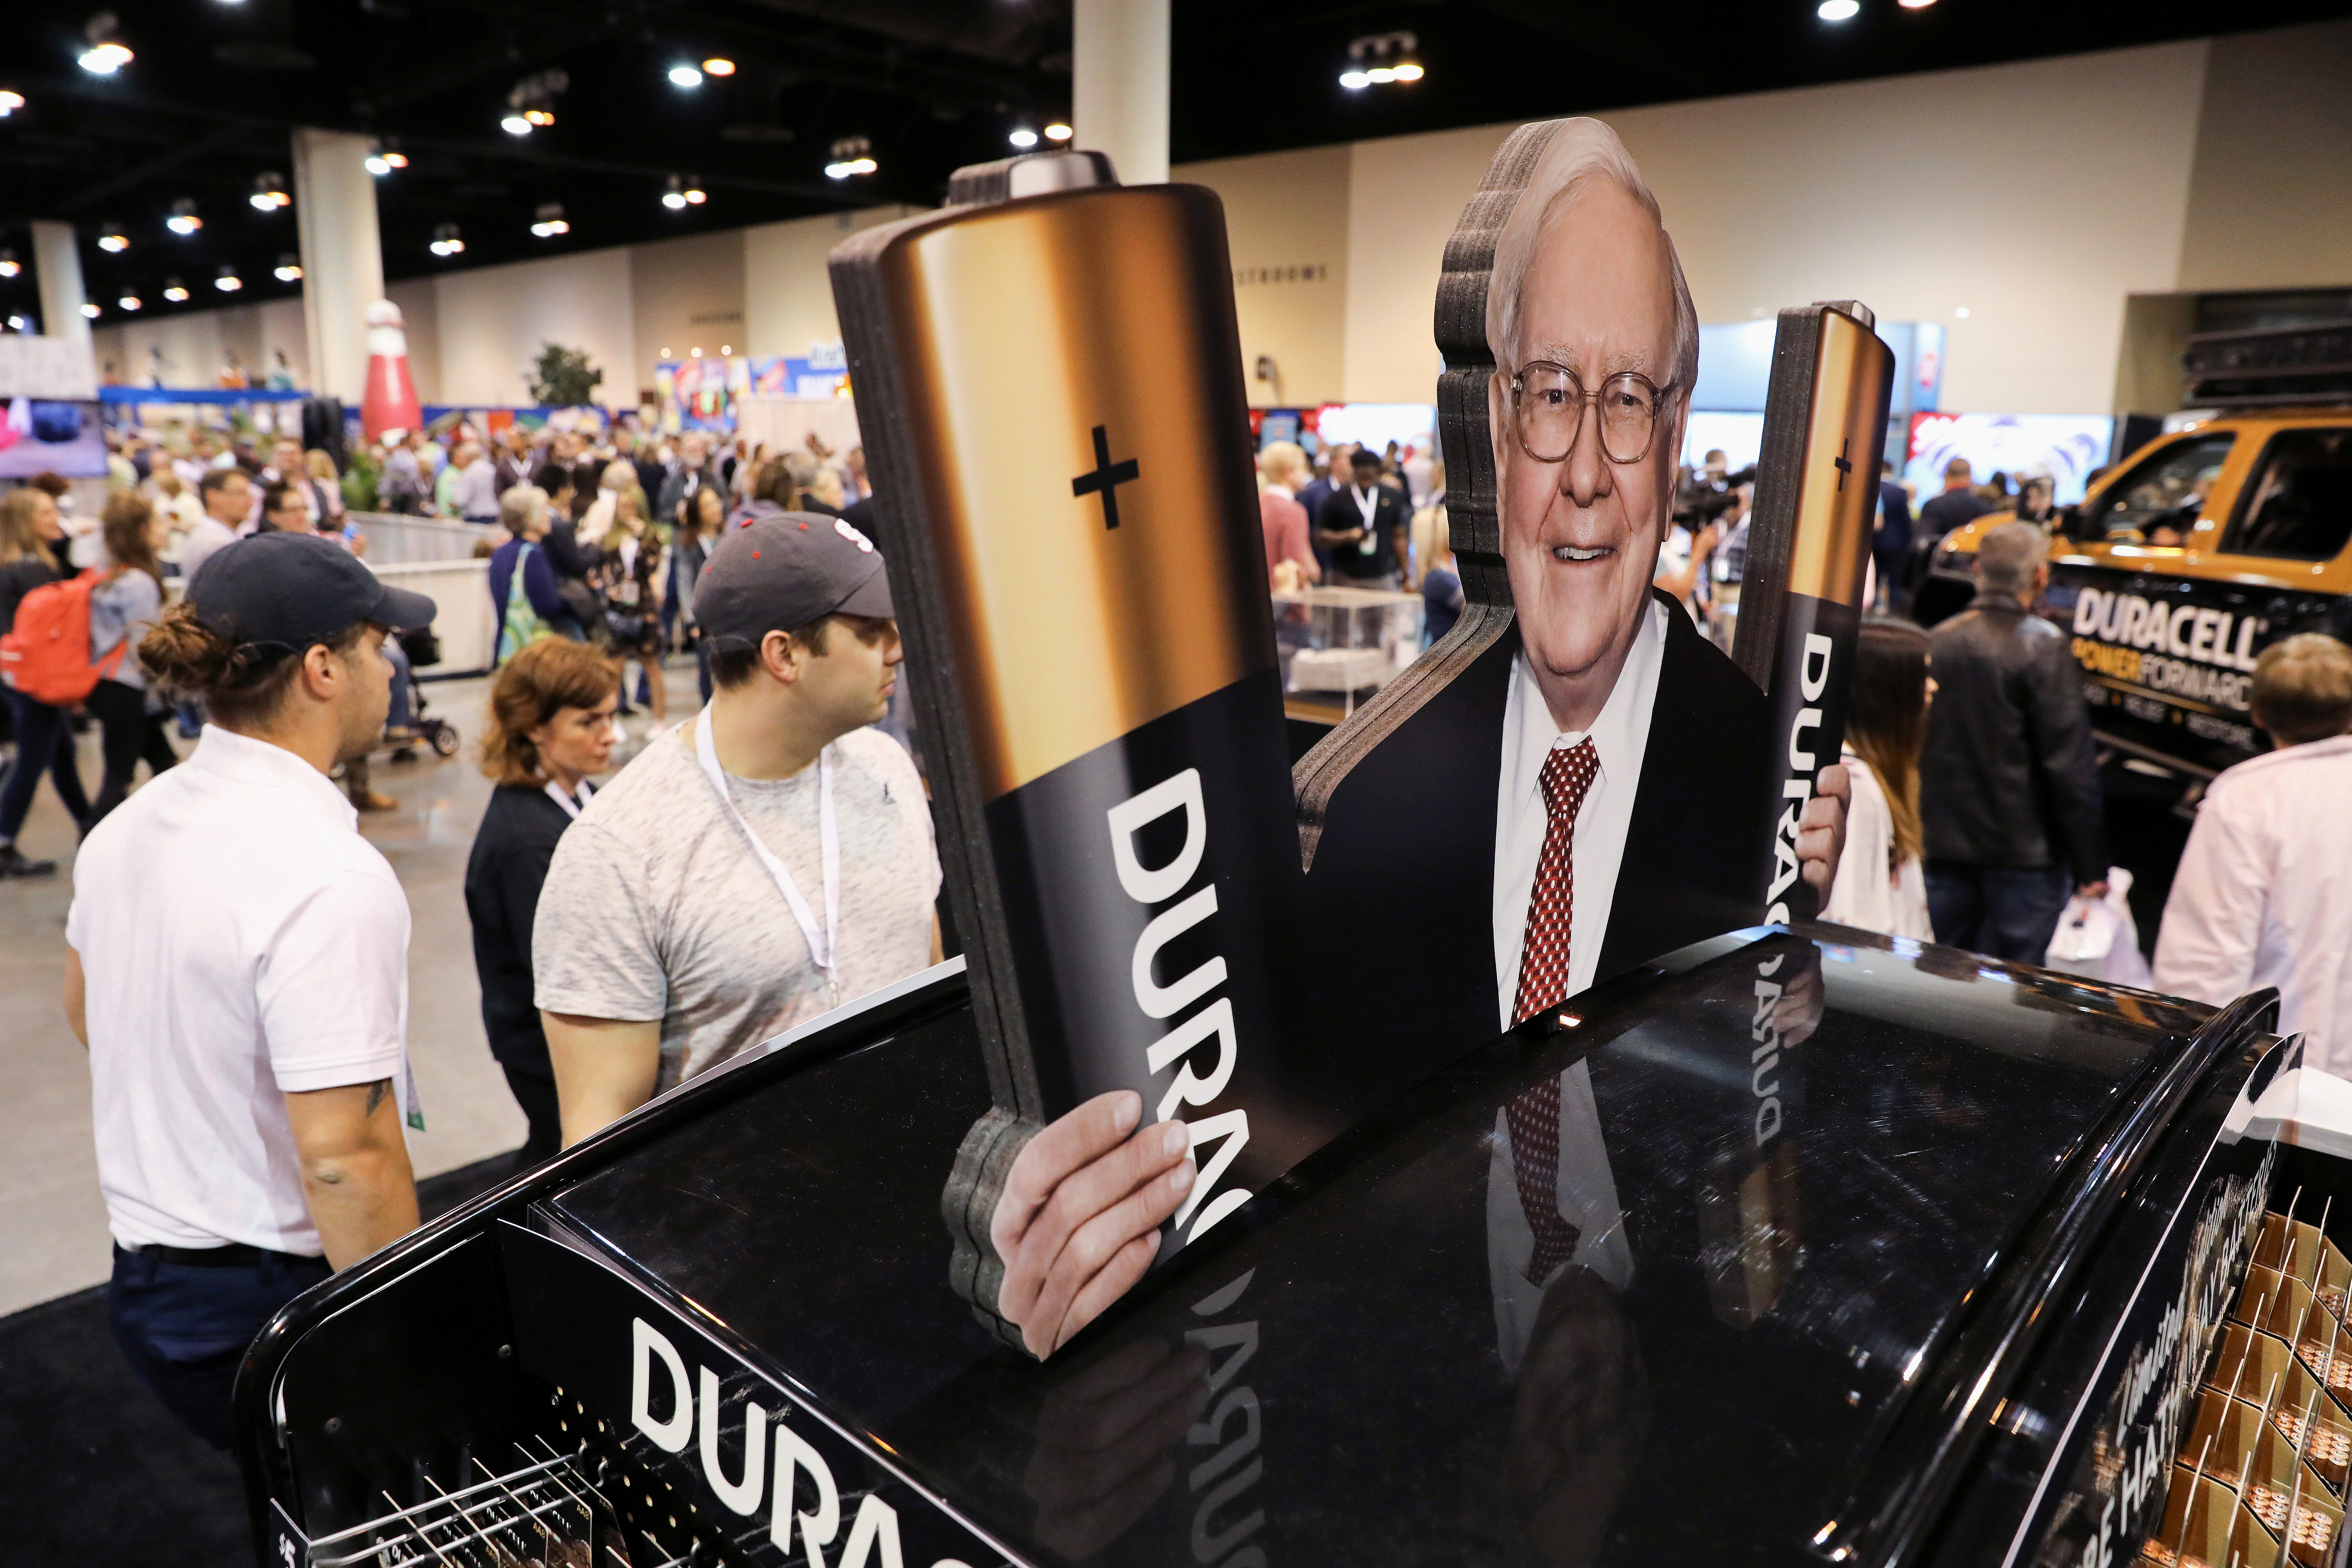 Shareholders shop for discounted products at the annual Berkshire Hathaway shareholder meeting in Omaha